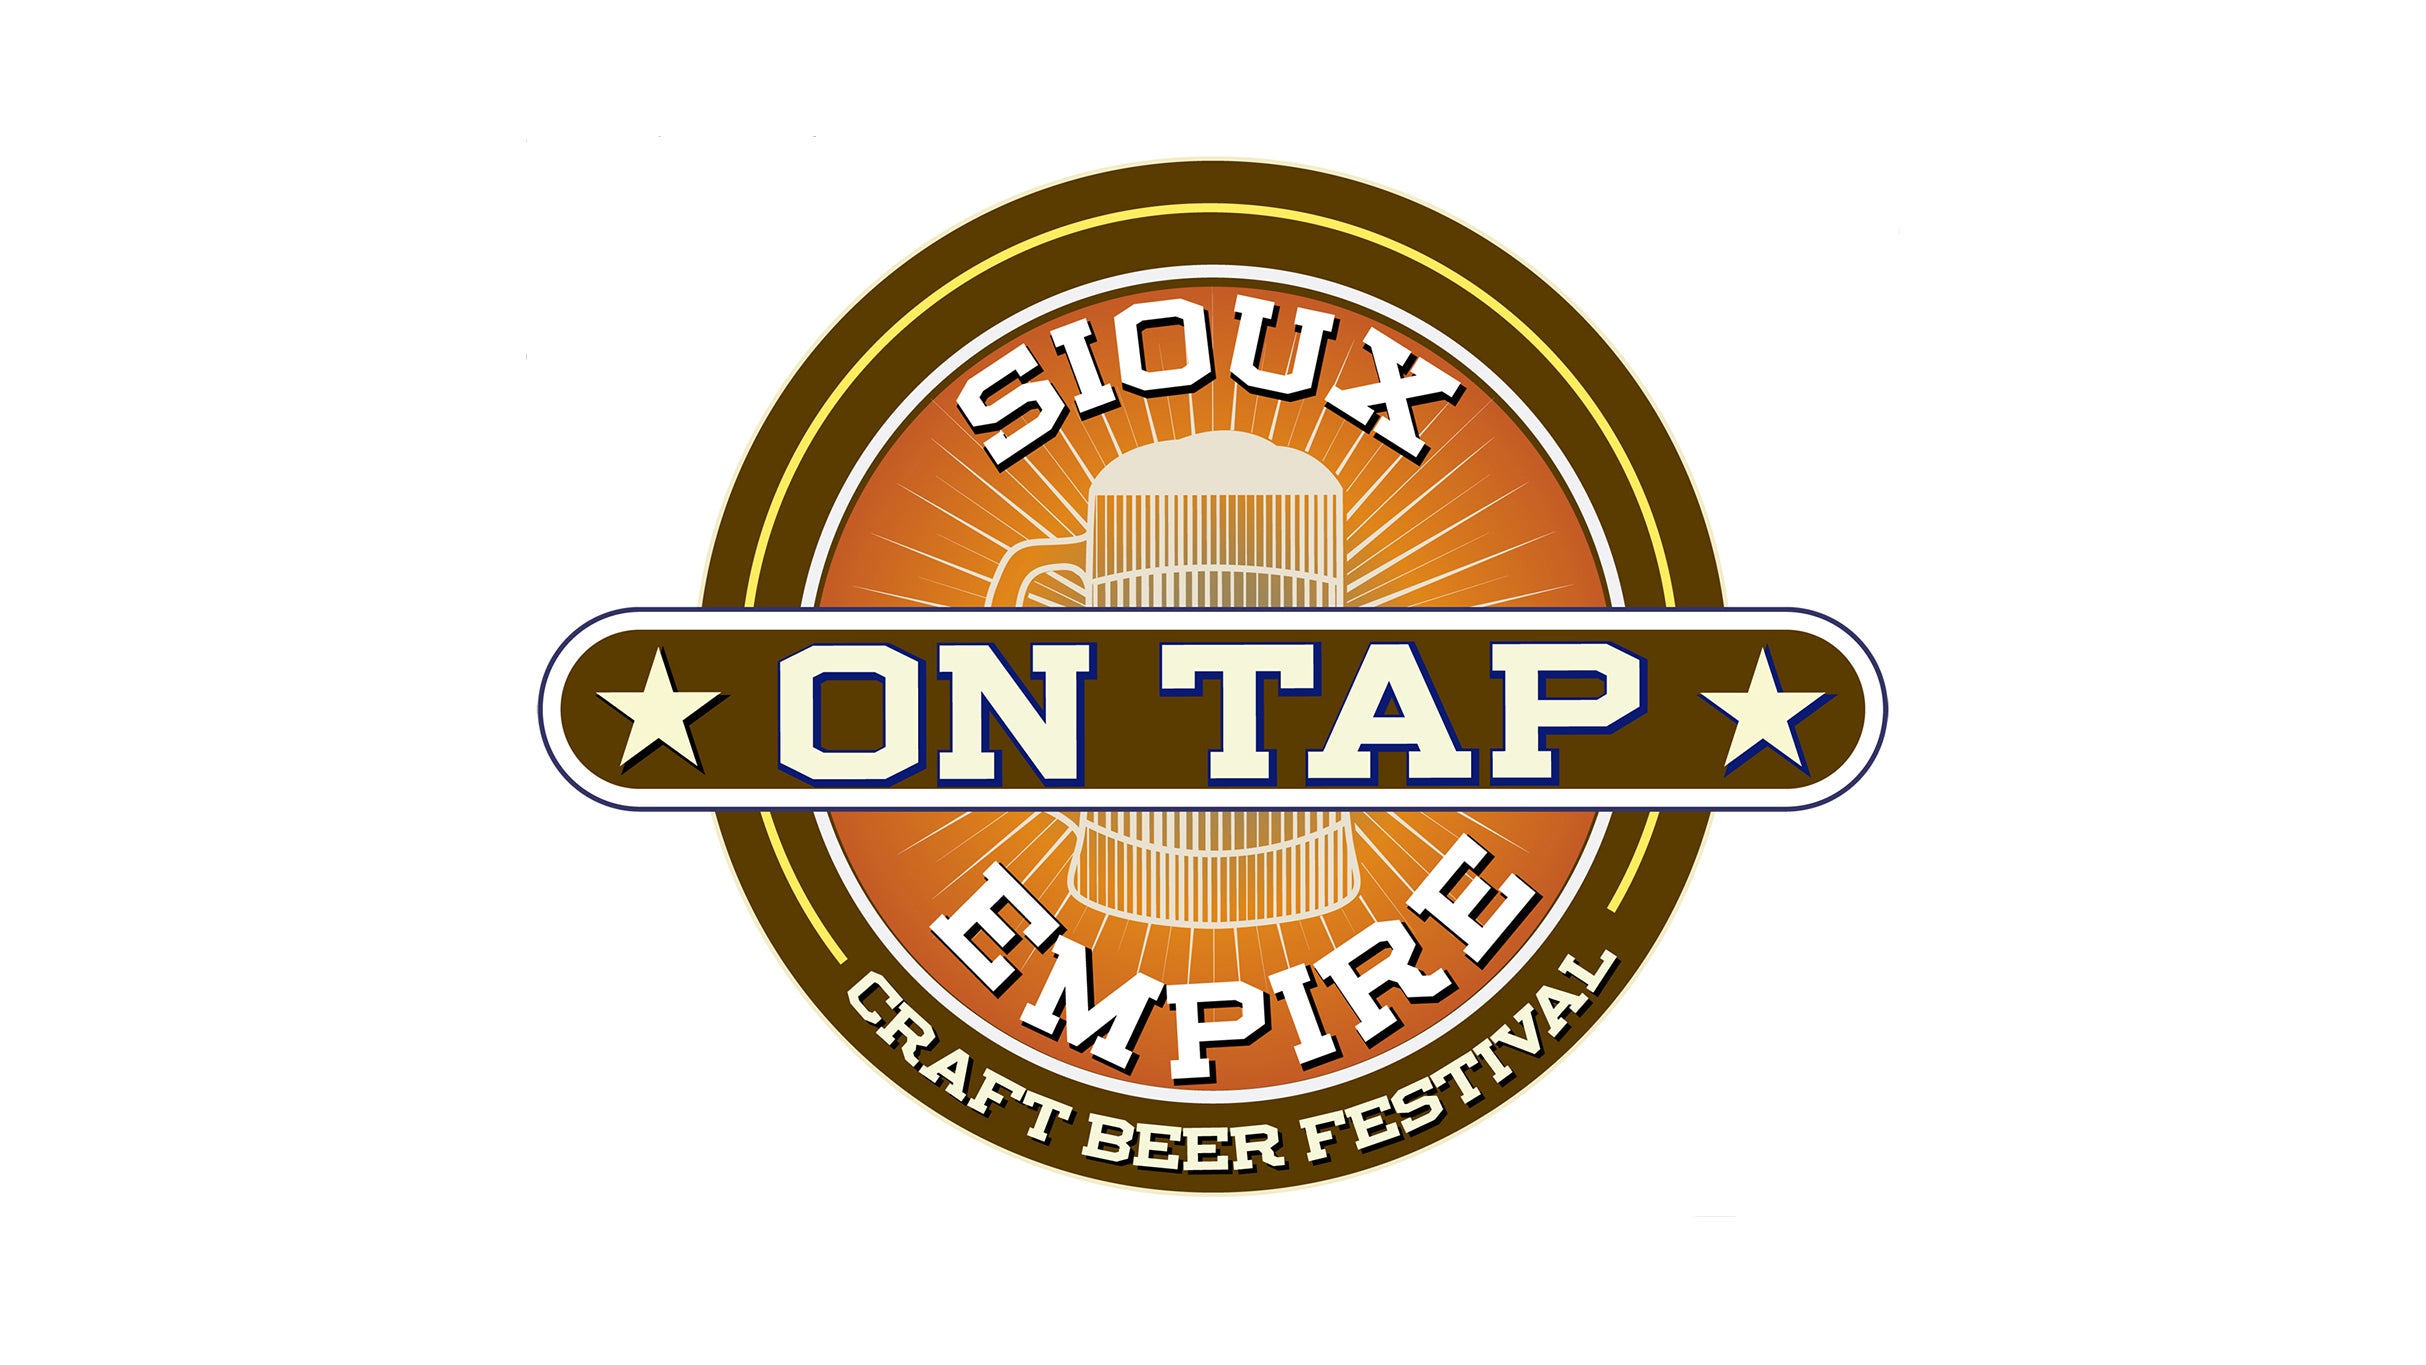 Sioux Empire On Tap in Sioux Falls promo photo for Tier 2 Pricing presale offer code